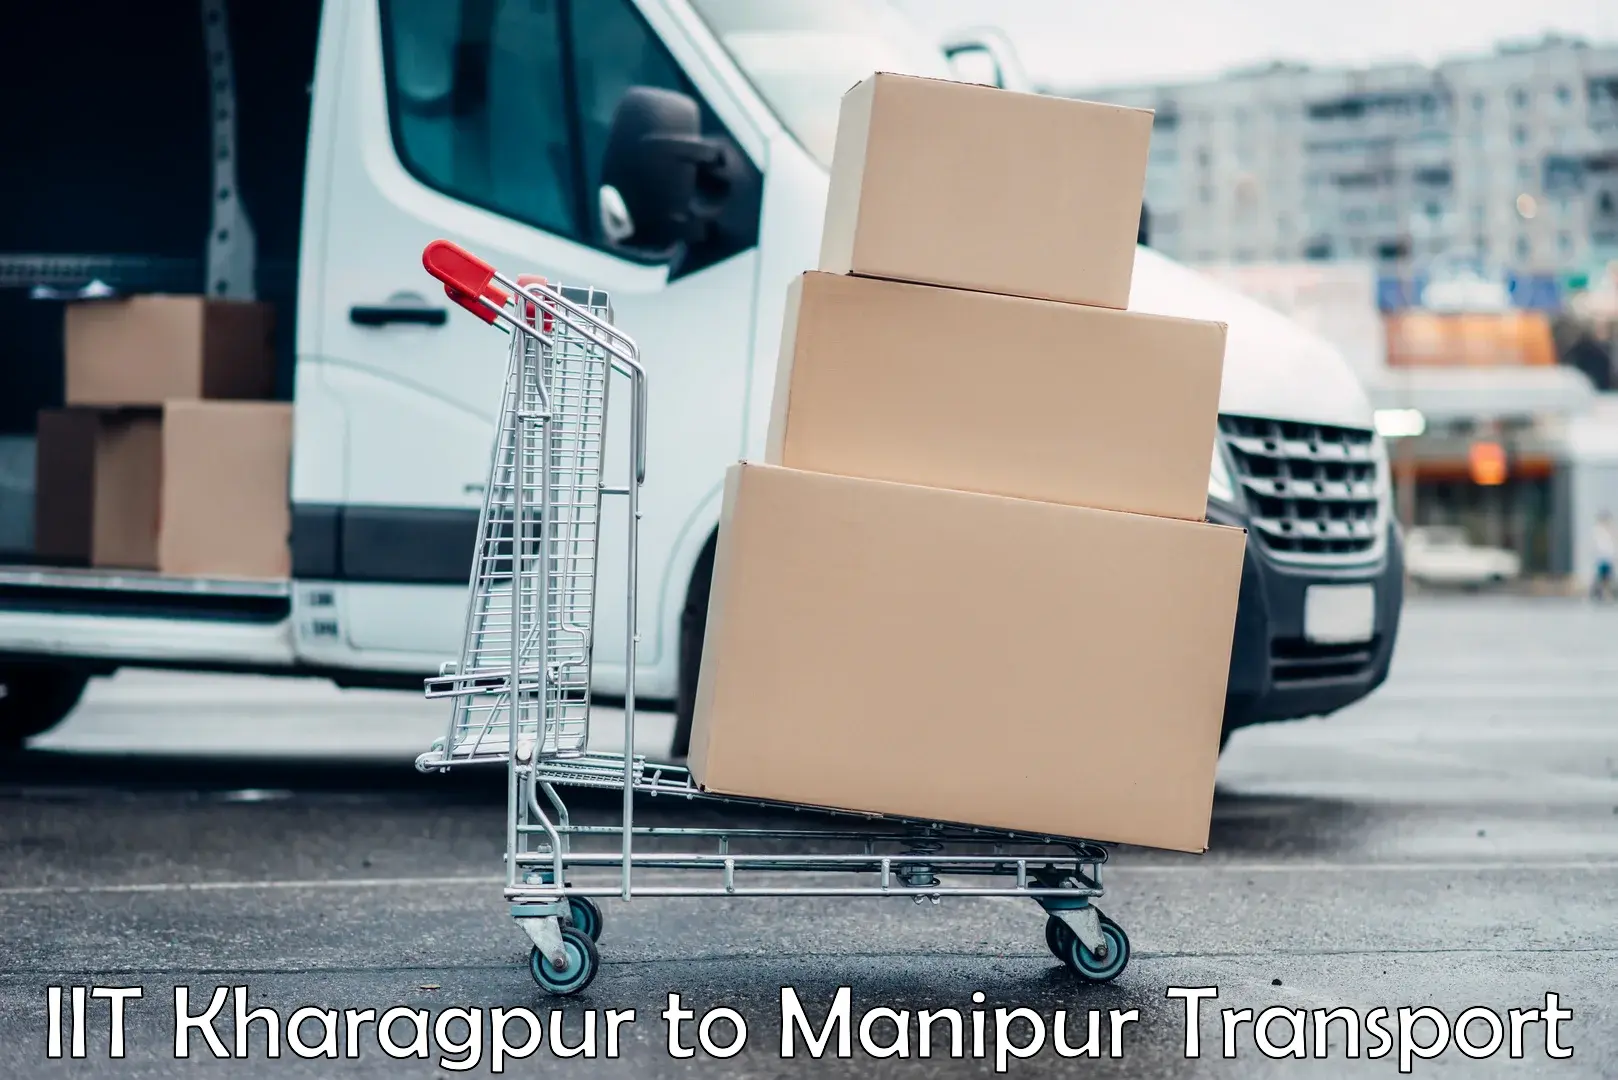 Commercial transport service IIT Kharagpur to Manipur